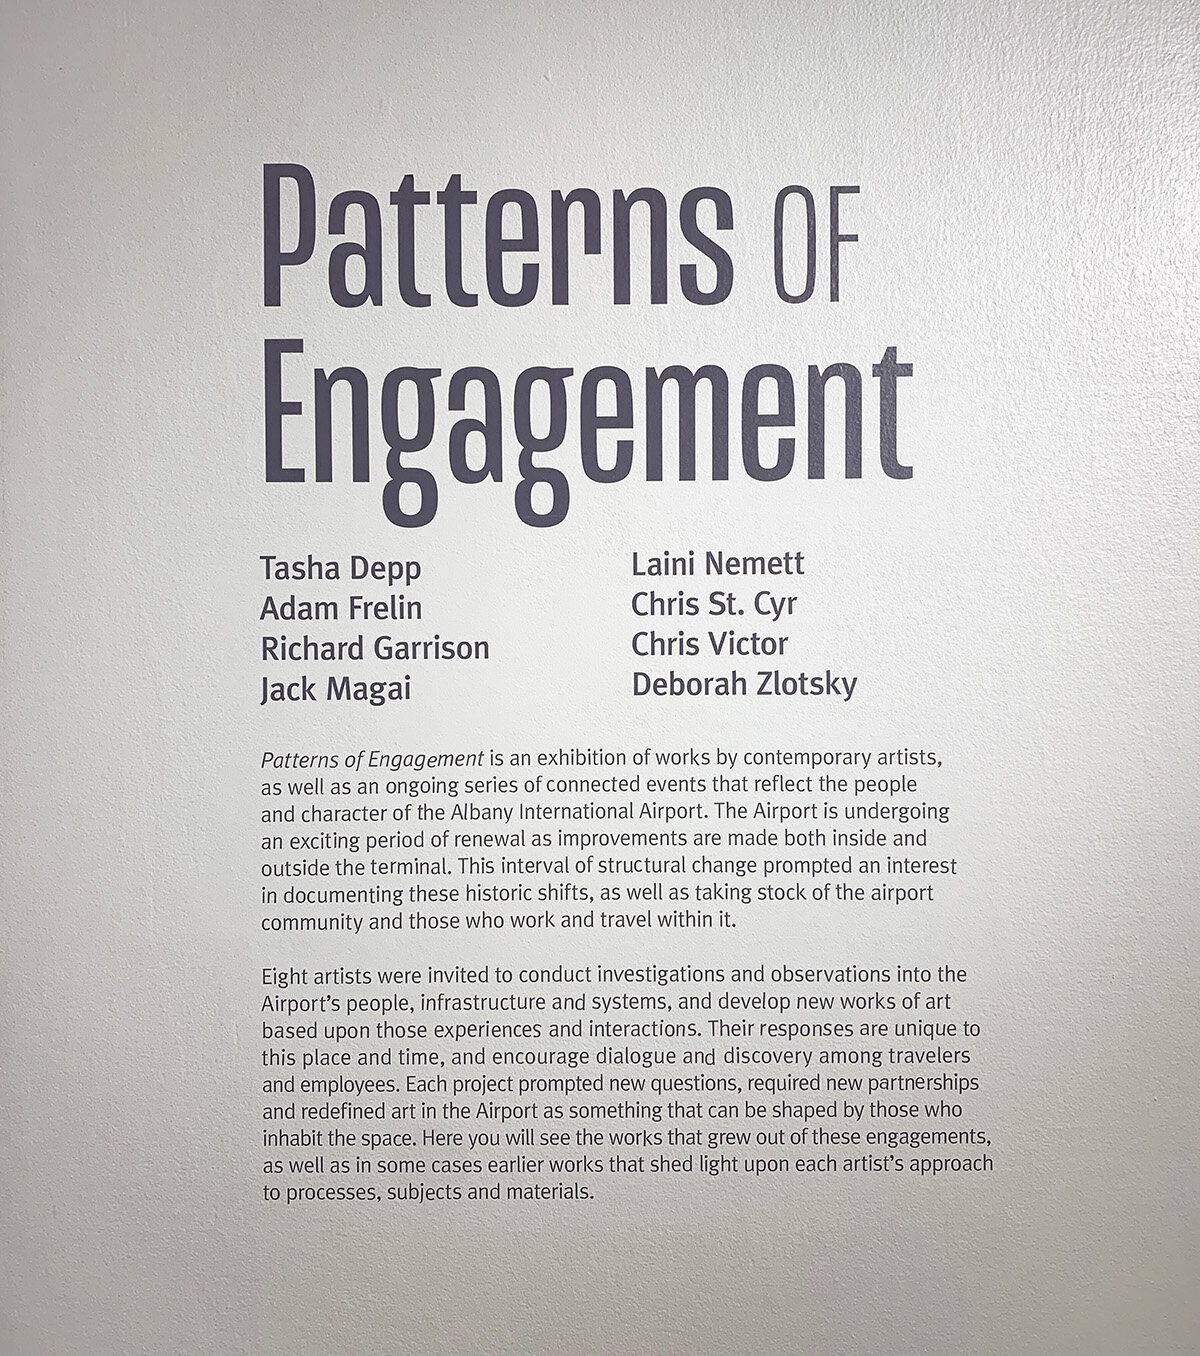  Wall plaque,  Patterns of Engagement  Albany International Airport Gallery 